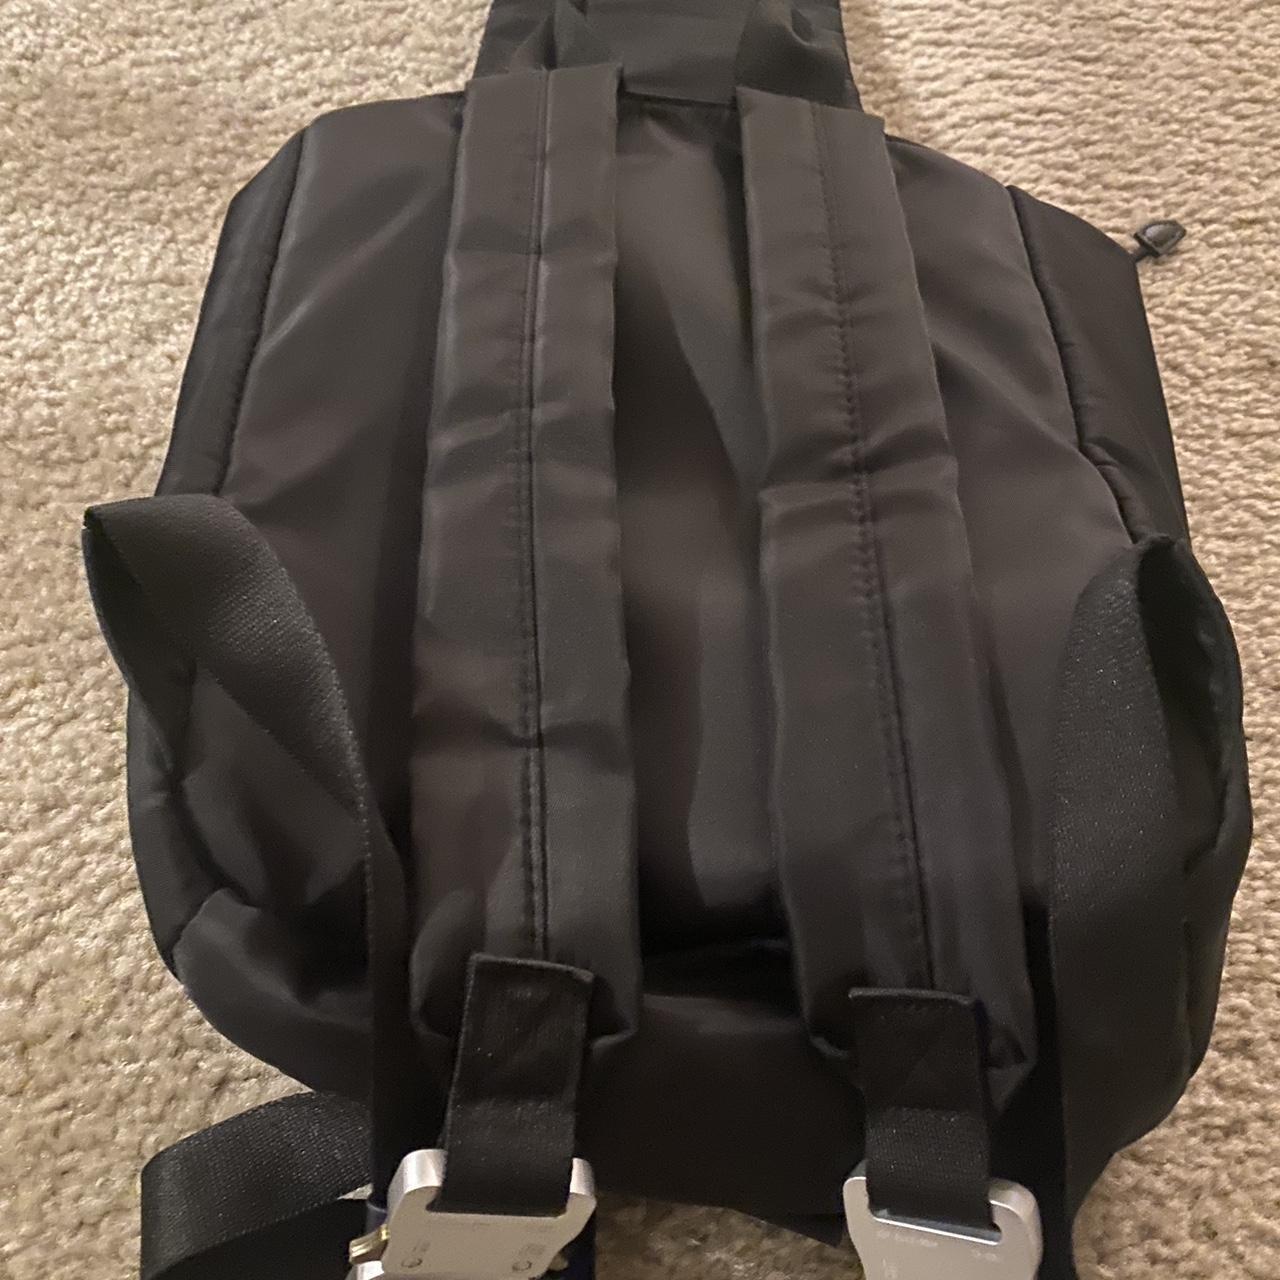 ALYX Silver Reflective Tank Backpack for Sale in Sugar Land, TX